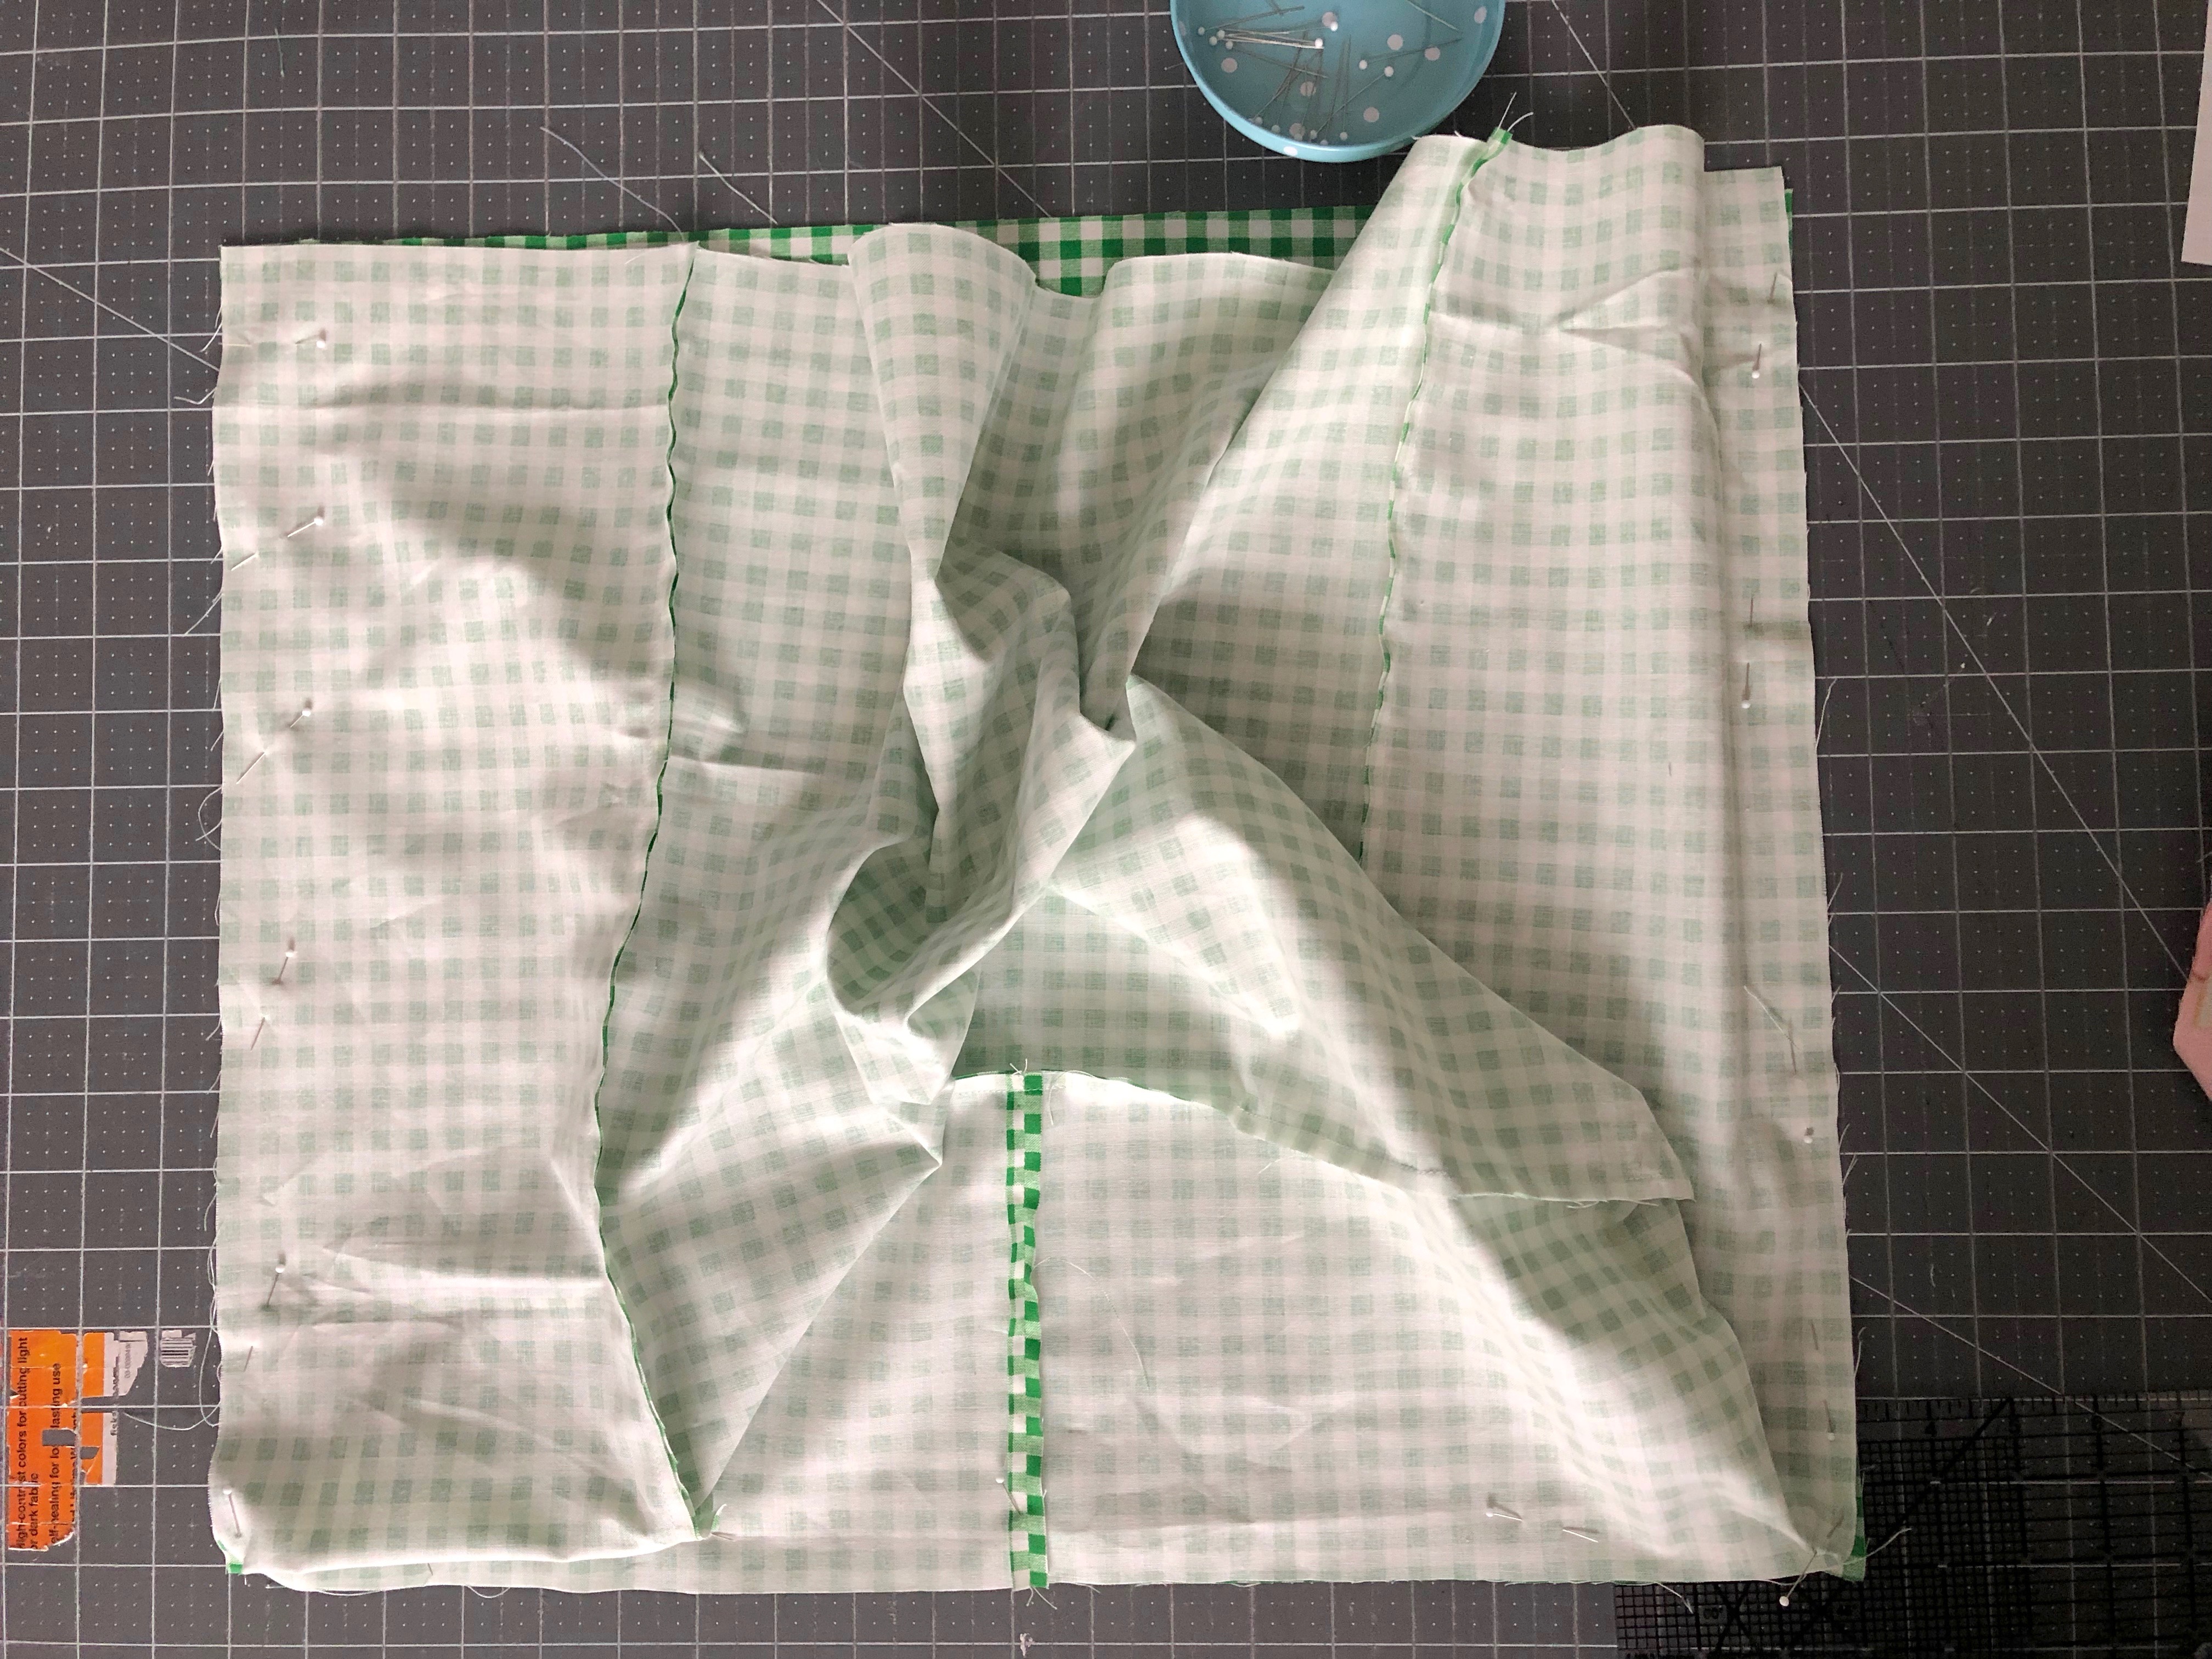 Reversible Tote Bag Tutorial featured by top US quilting blog Diary of a Quilter